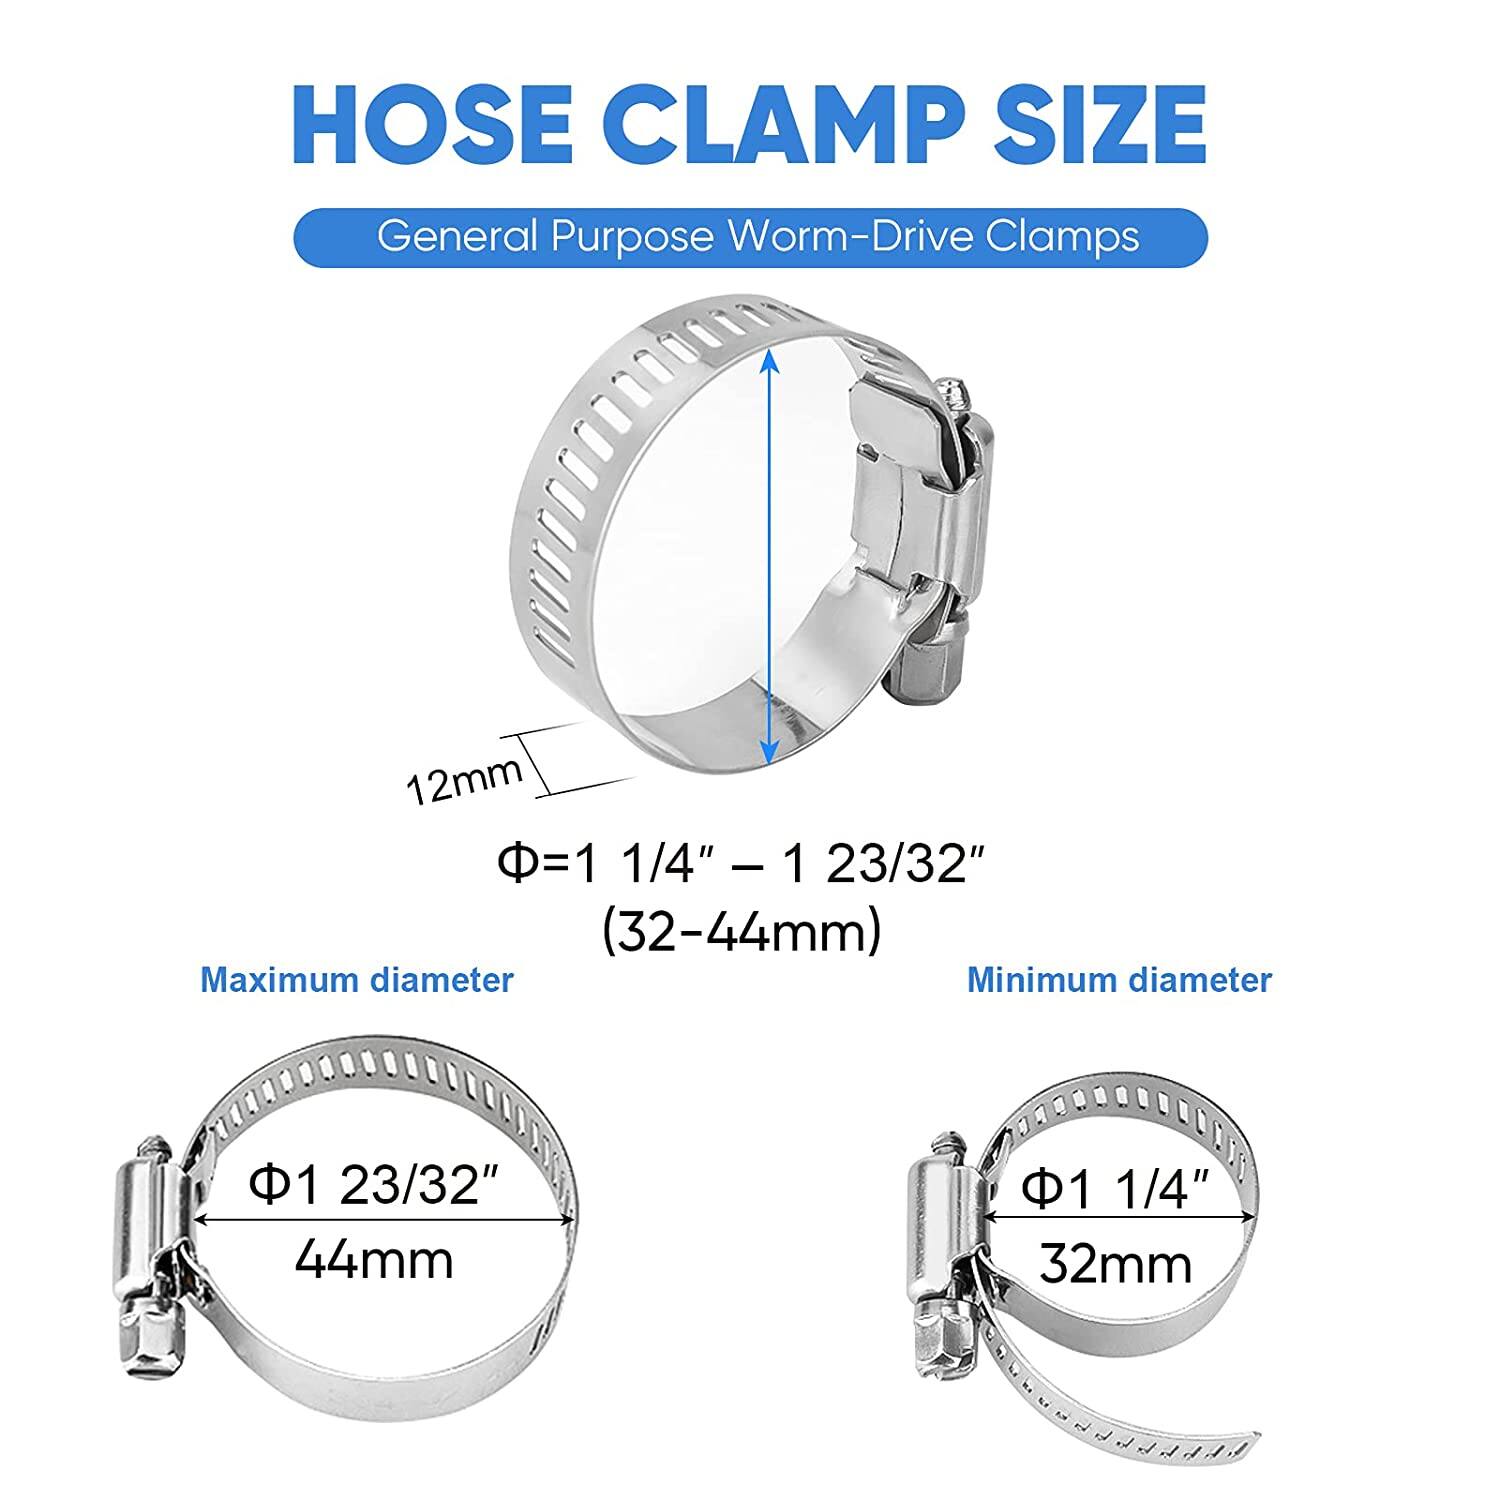 Hose Clamp and Cable Clamp Set Stainless Steel (13 sizes) $5.59 - $17.49 + Free Shipping w/ Prime or $25+